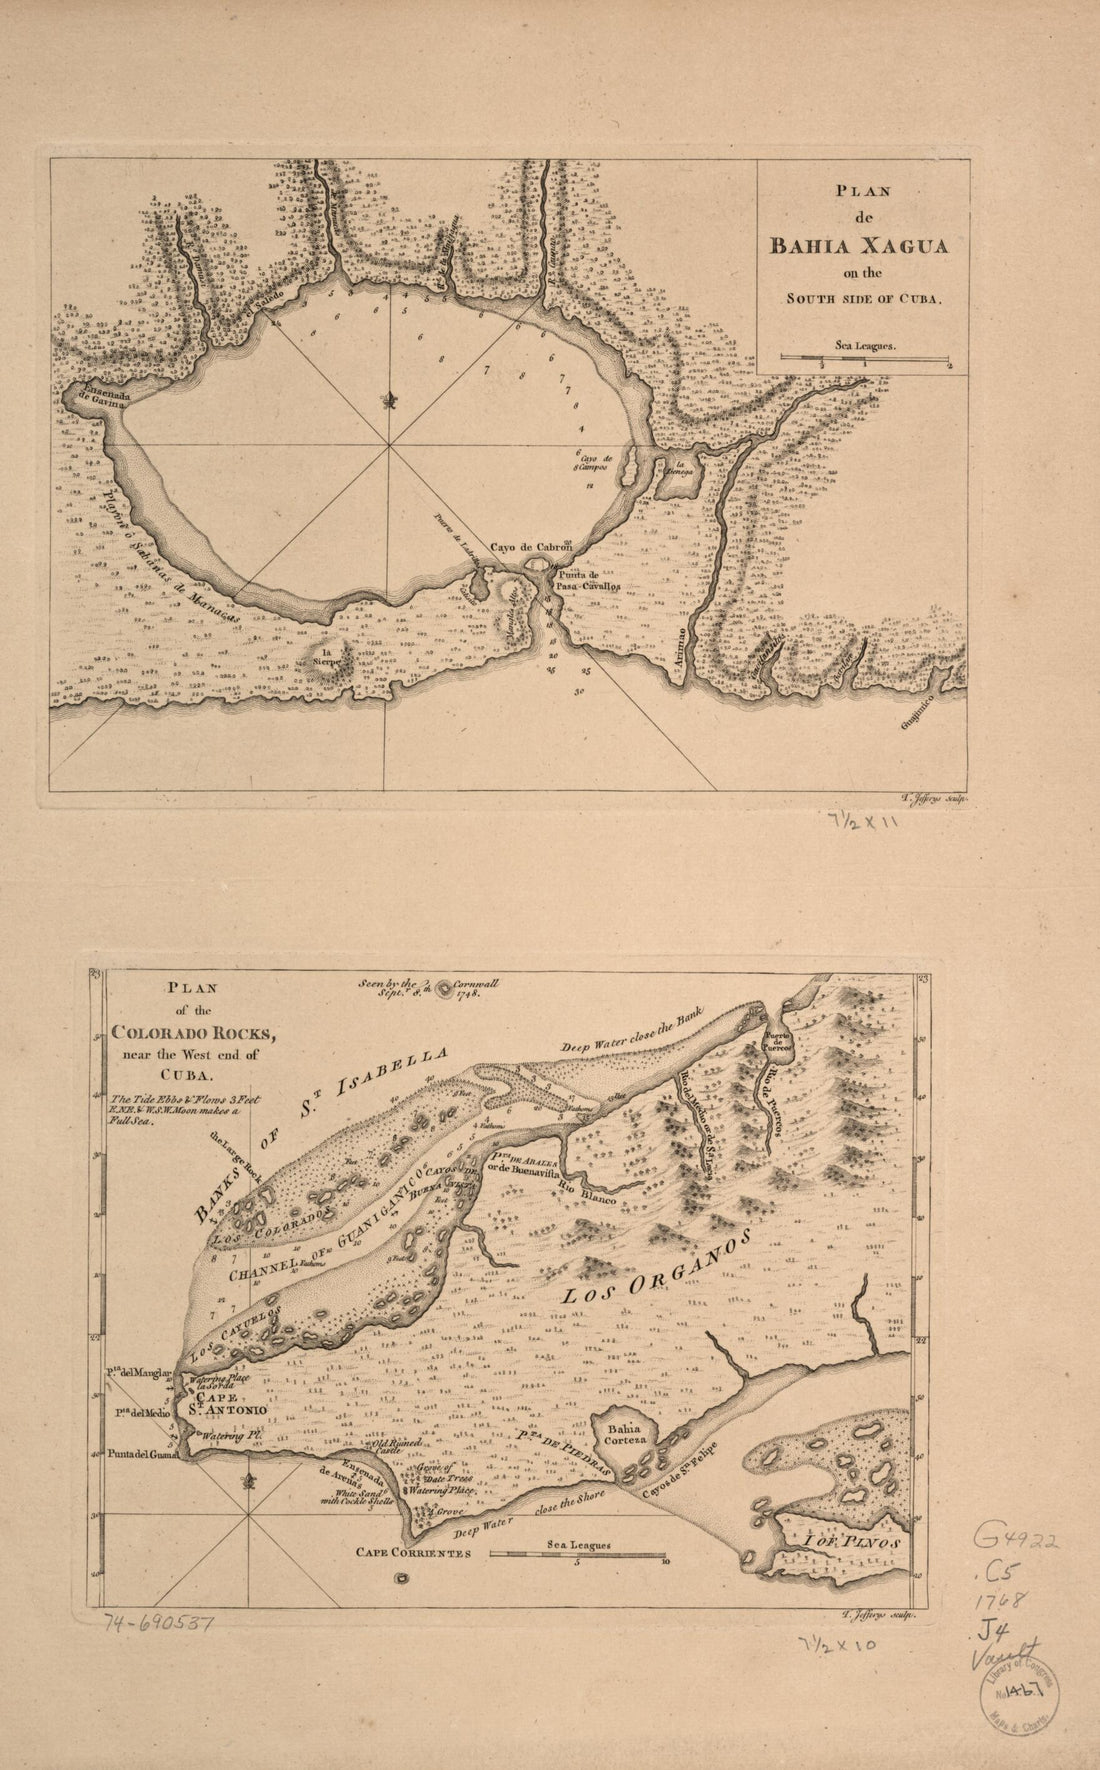 This old map of Plan De Bahía Xagua On the South Side of Cuba; Plan of the Colorado Rocks, Near the West End of Cuba from 1768 was created by Thomas Jefferys in 1768